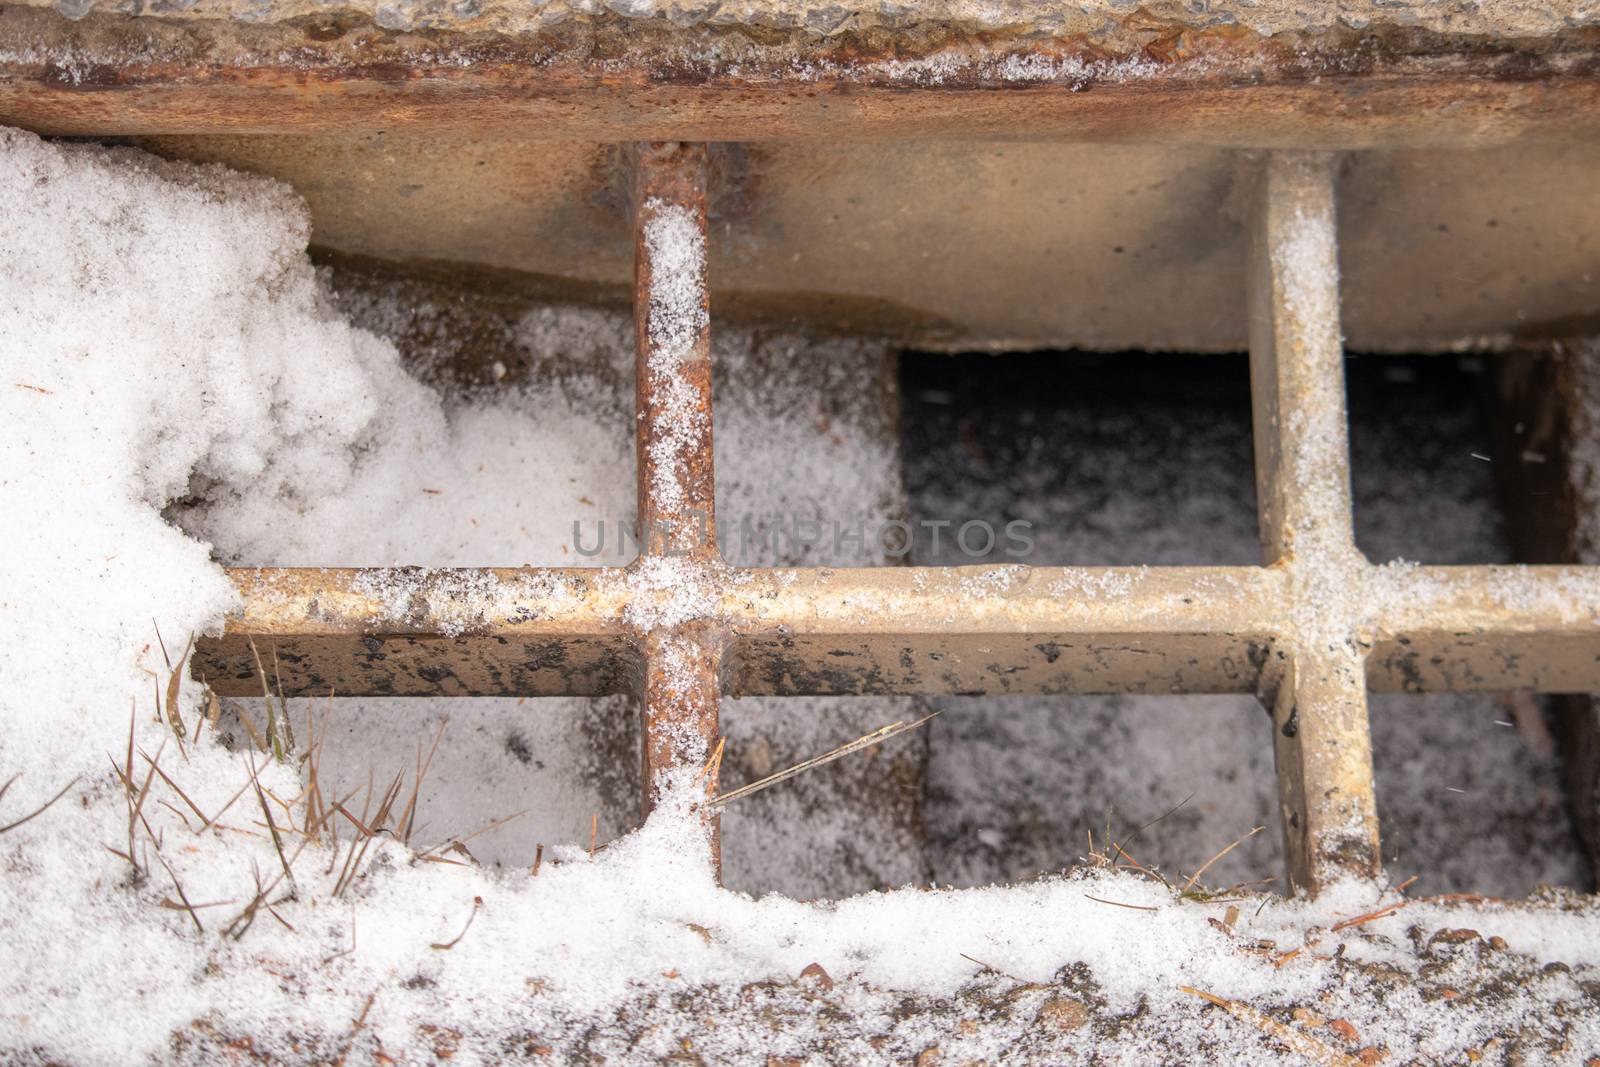 Rusting Grating of Storm Drain on Snowy Roadside by colintemple